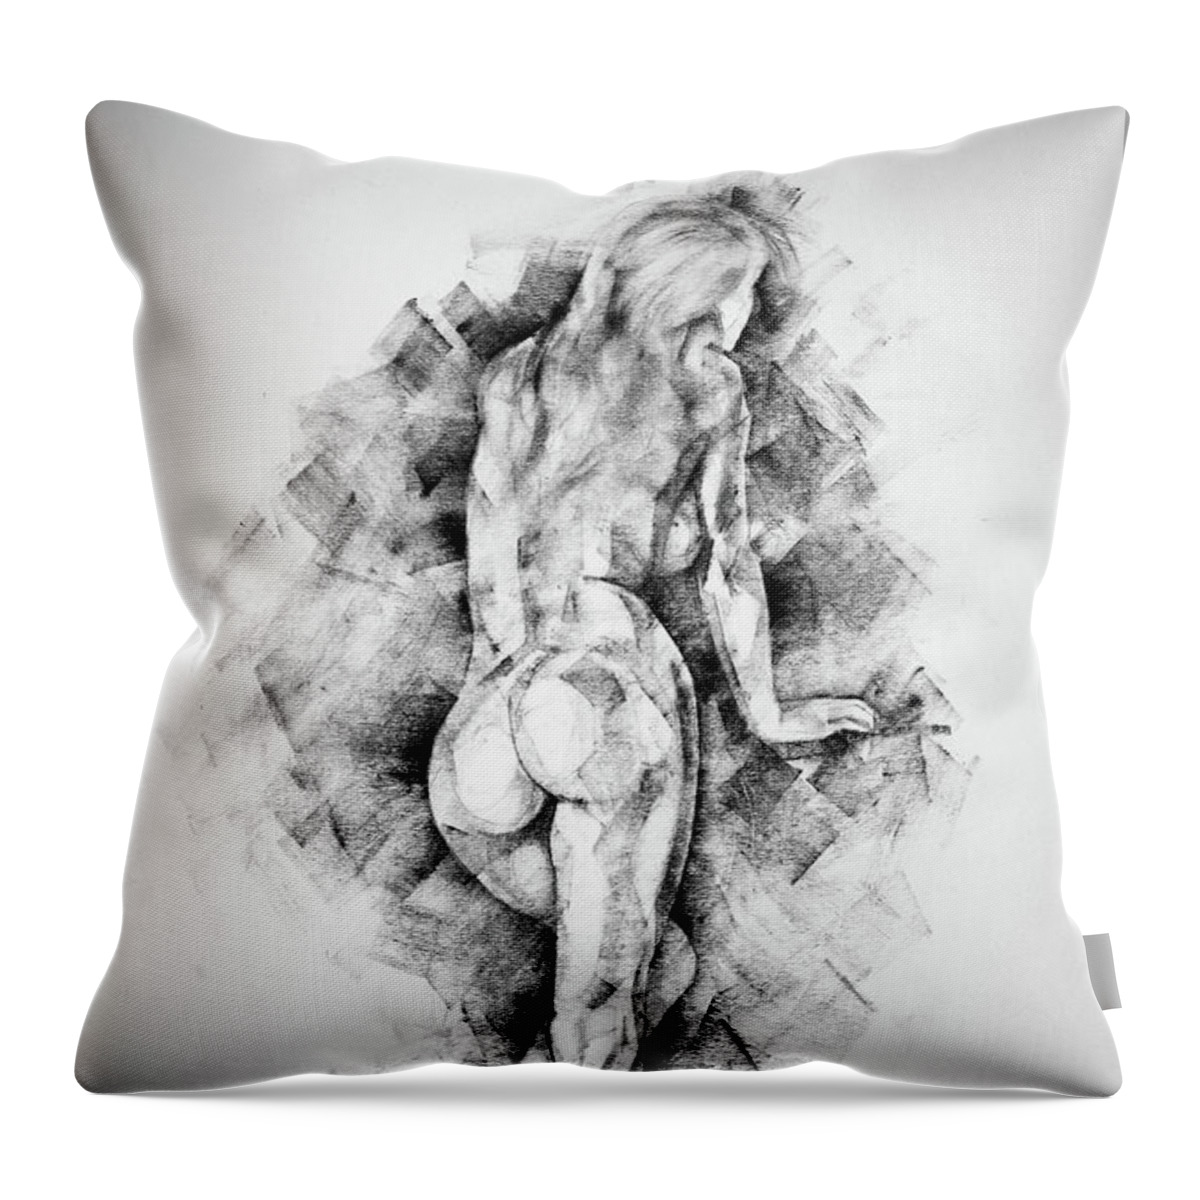 Erotic Throw Pillow featuring the drawing Page 34 by Dimitar Hristov